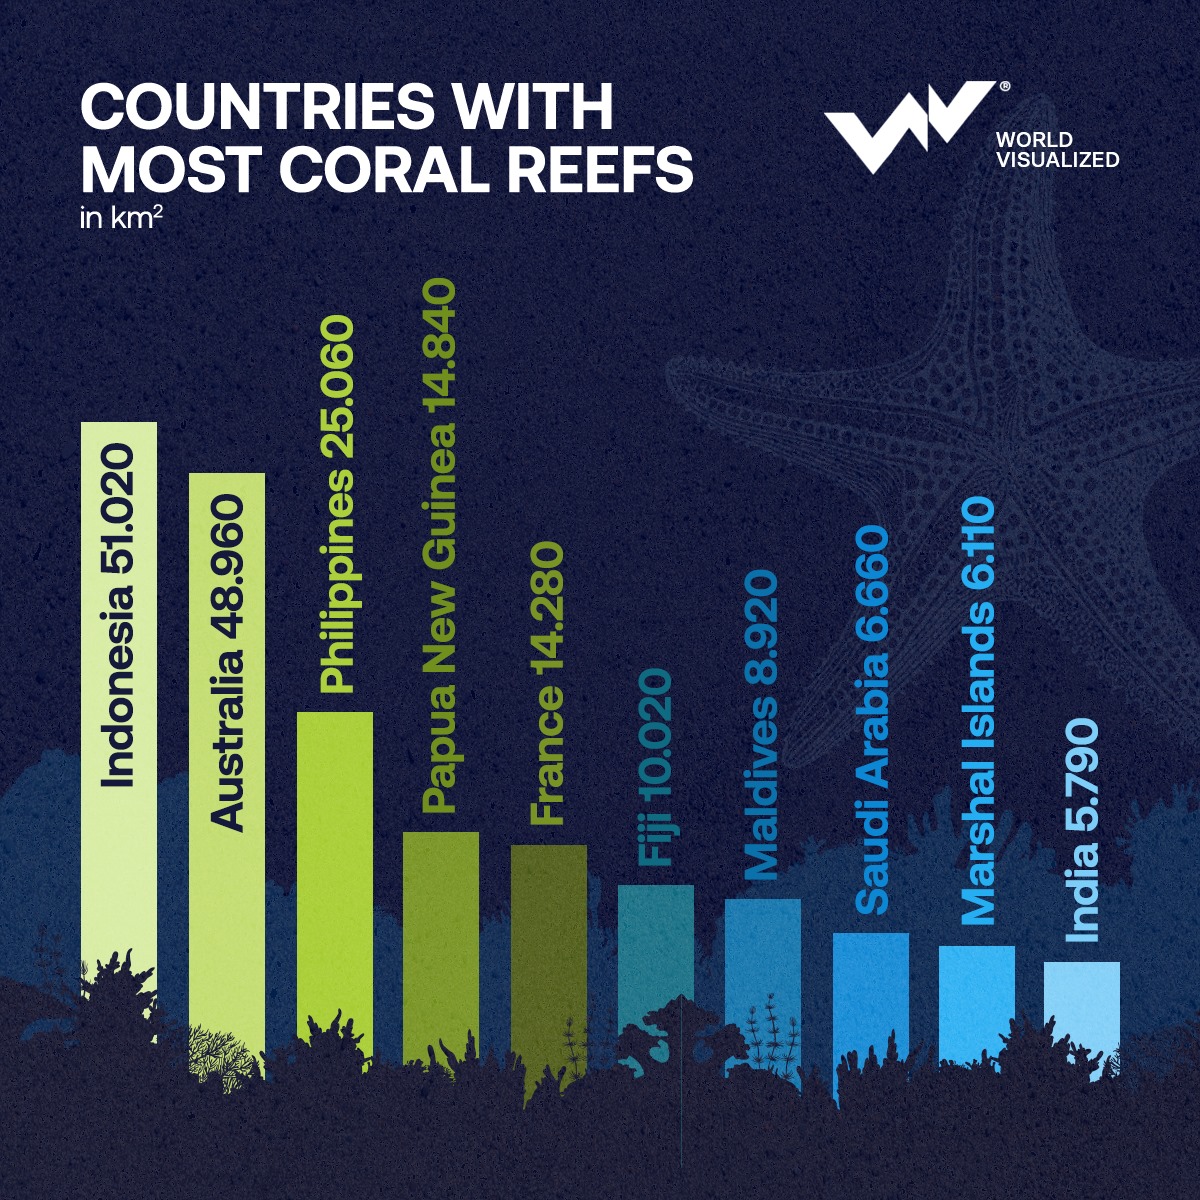 🐢🌍 Celebrating majestic coral reefs worldwide, emphasizing protection and preservation. Indonesia leads, followed by Australia. Pledge for marine conservation and biodiversity. #CoralReefs  #MarineConservation #DiveIntoNature #Indonesia #Australia #Philippines